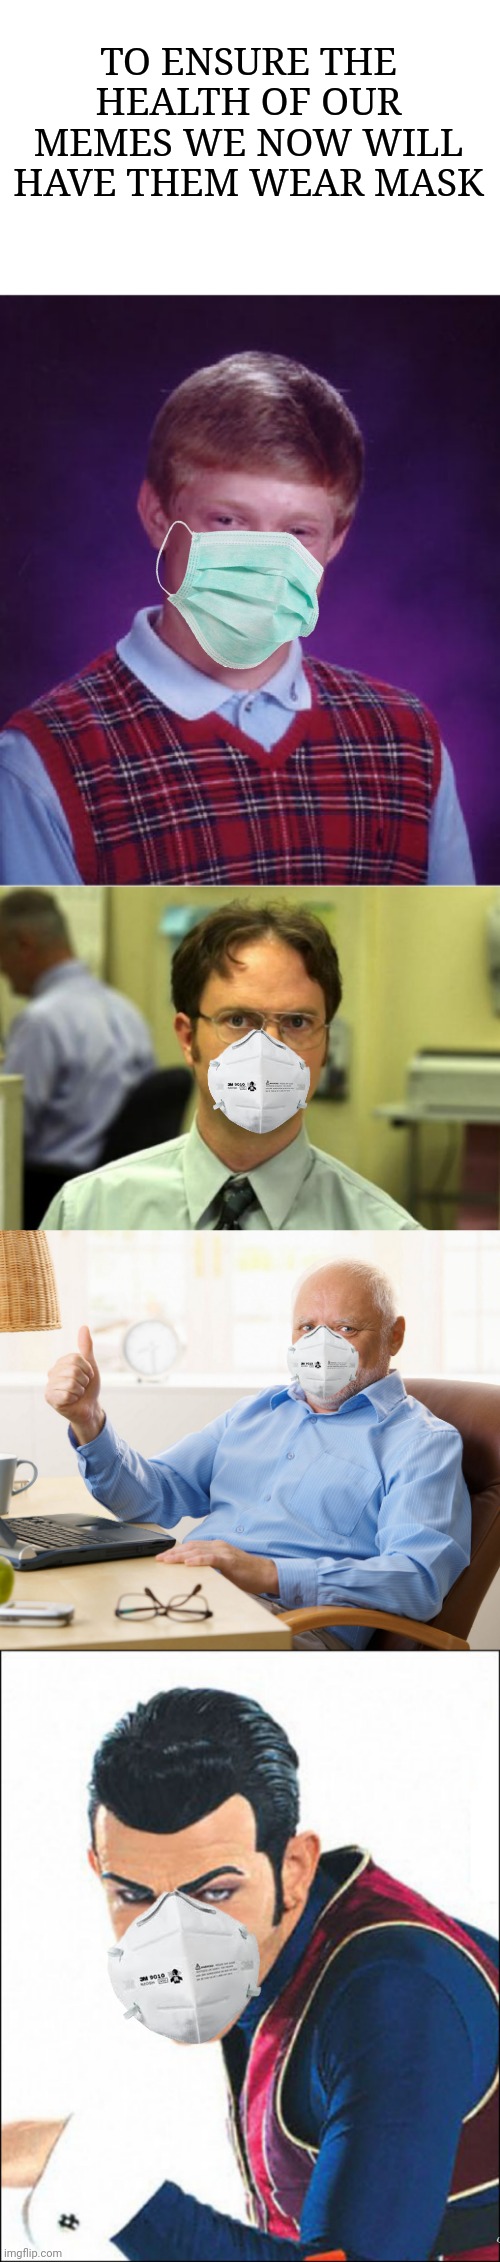 TO ENSURE THE HEALTH OF OUR MEMES WE NOW WILL HAVE THEM WEAR MASK | image tagged in memes,dwight schrute,bad luck brian,robbie rotten,hide the pain harold | made w/ Imgflip meme maker